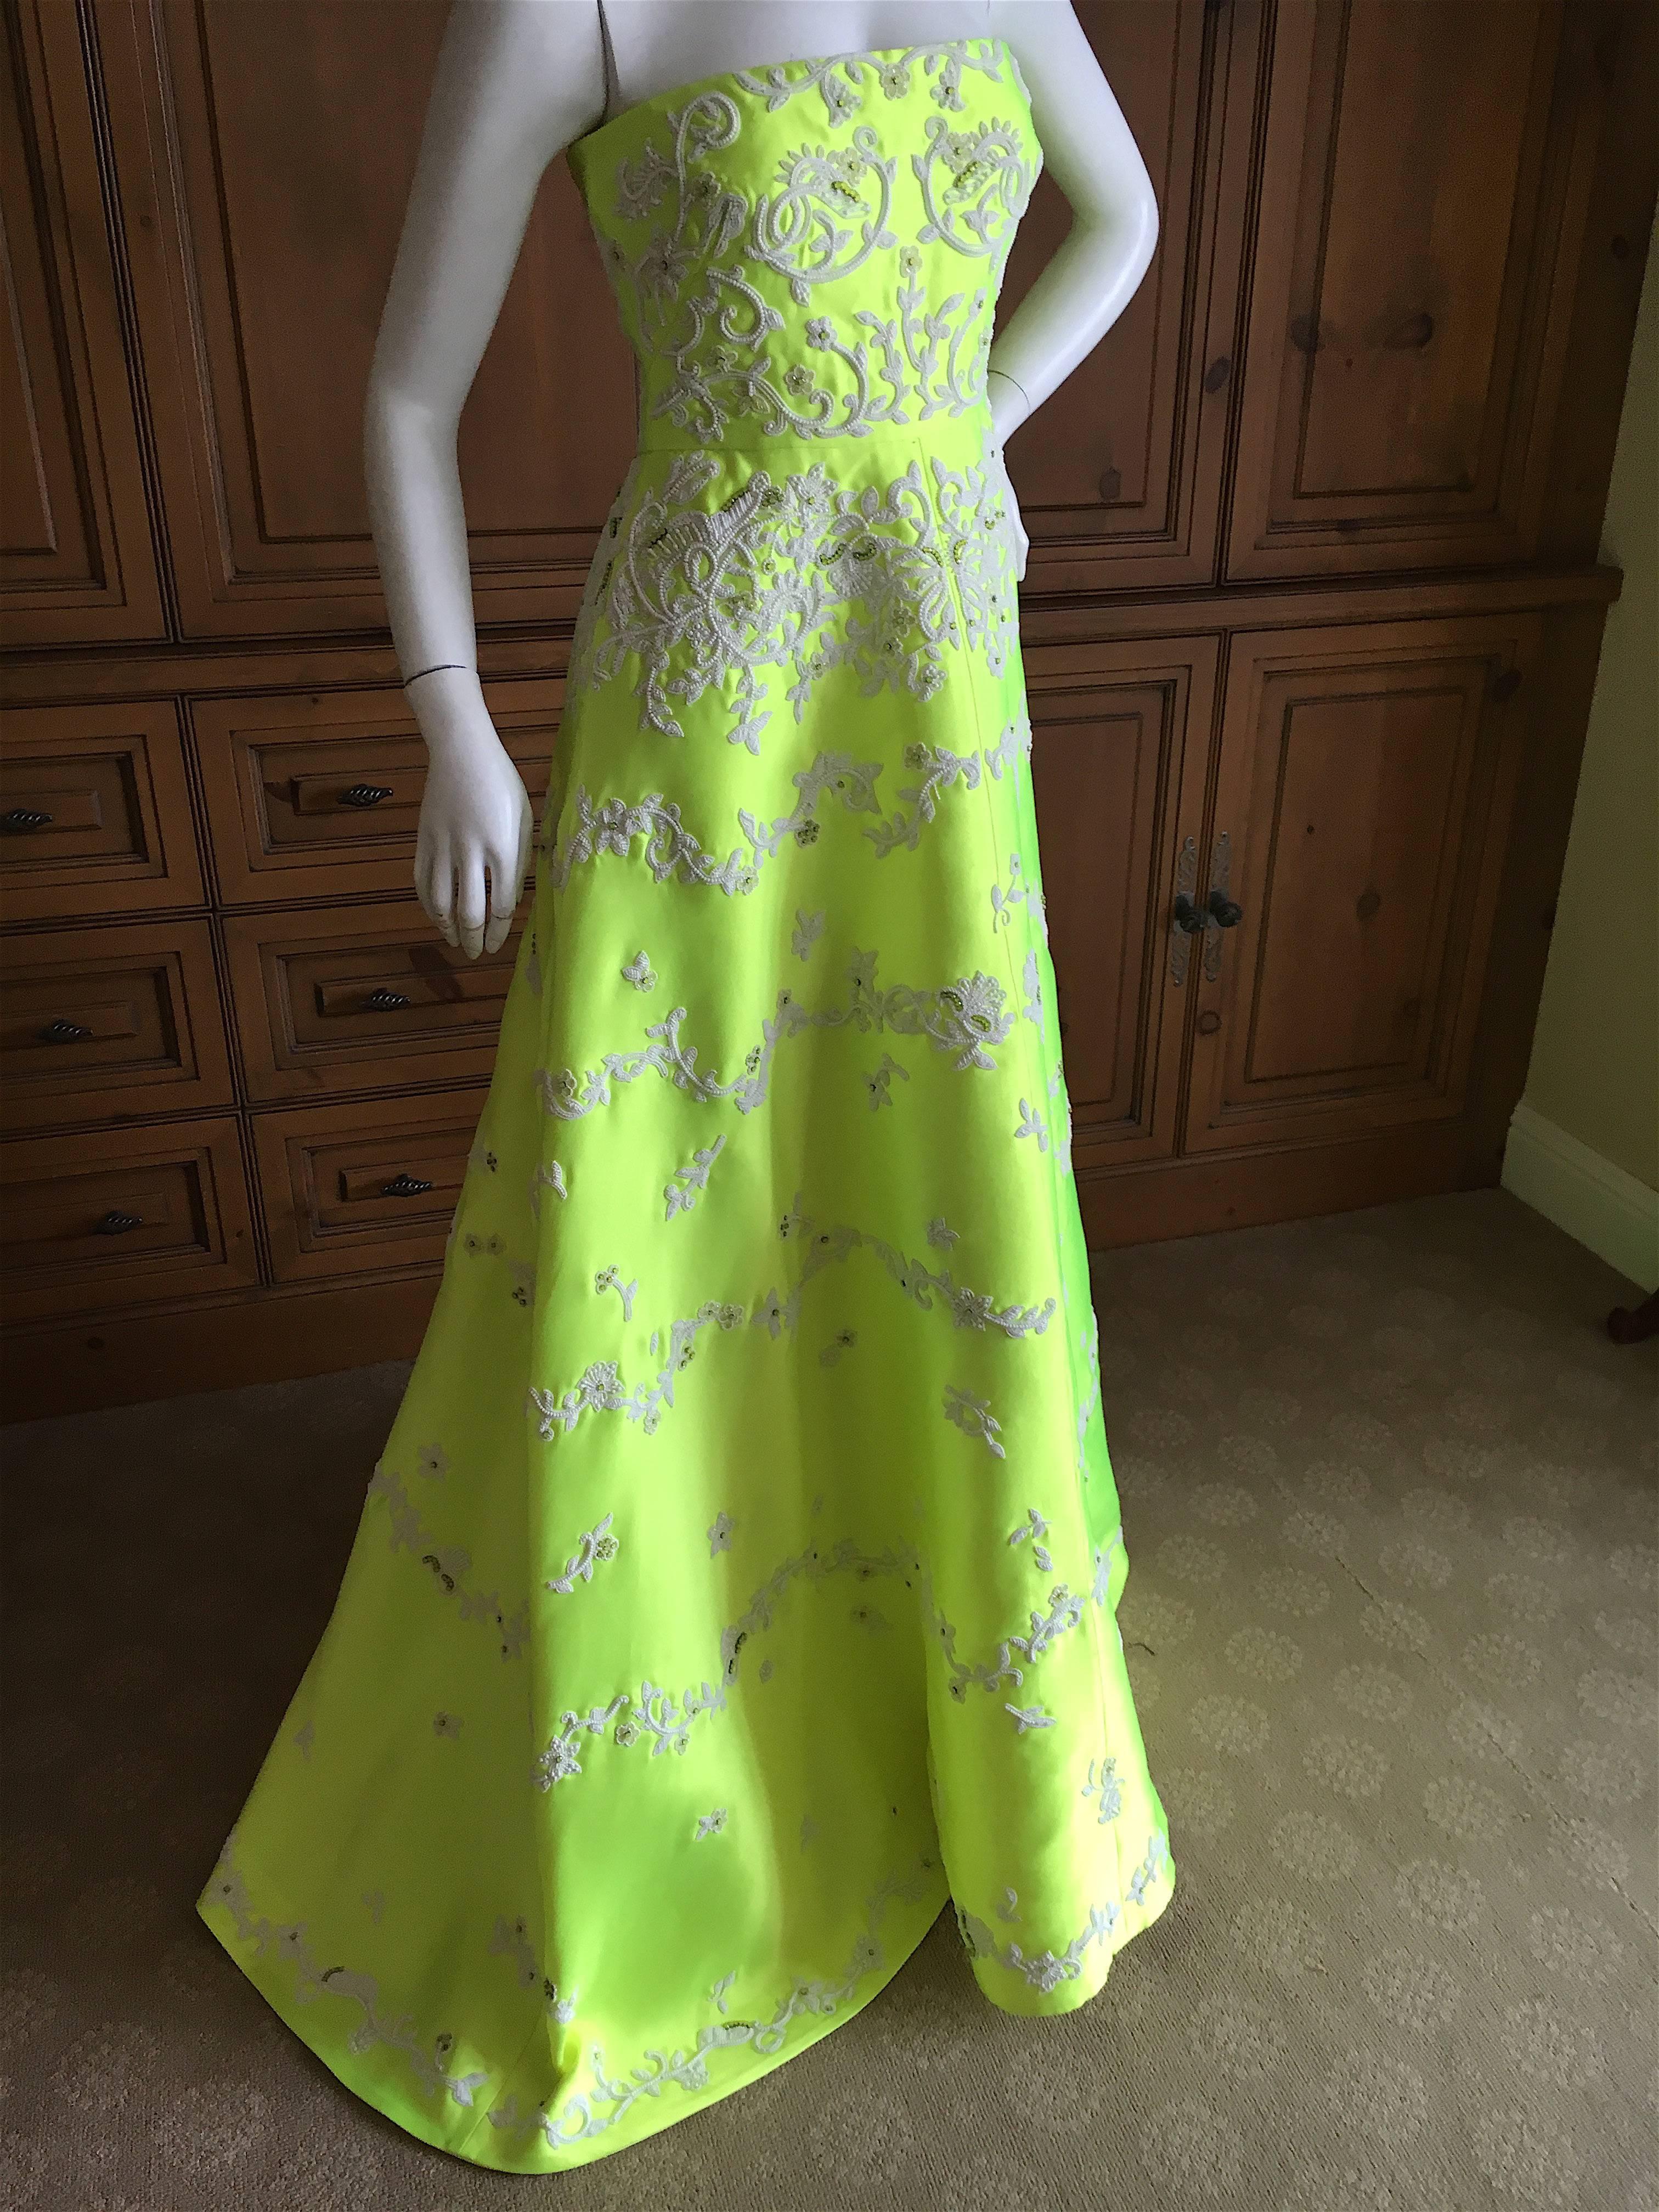 Incredible neon yellow evening dress from Valentino.
Currently on sale at $11,000 , this is unworn with tags.
The decorations are white and green Swarovski crystals in a baroque floral design.
Size 0
Bust 34